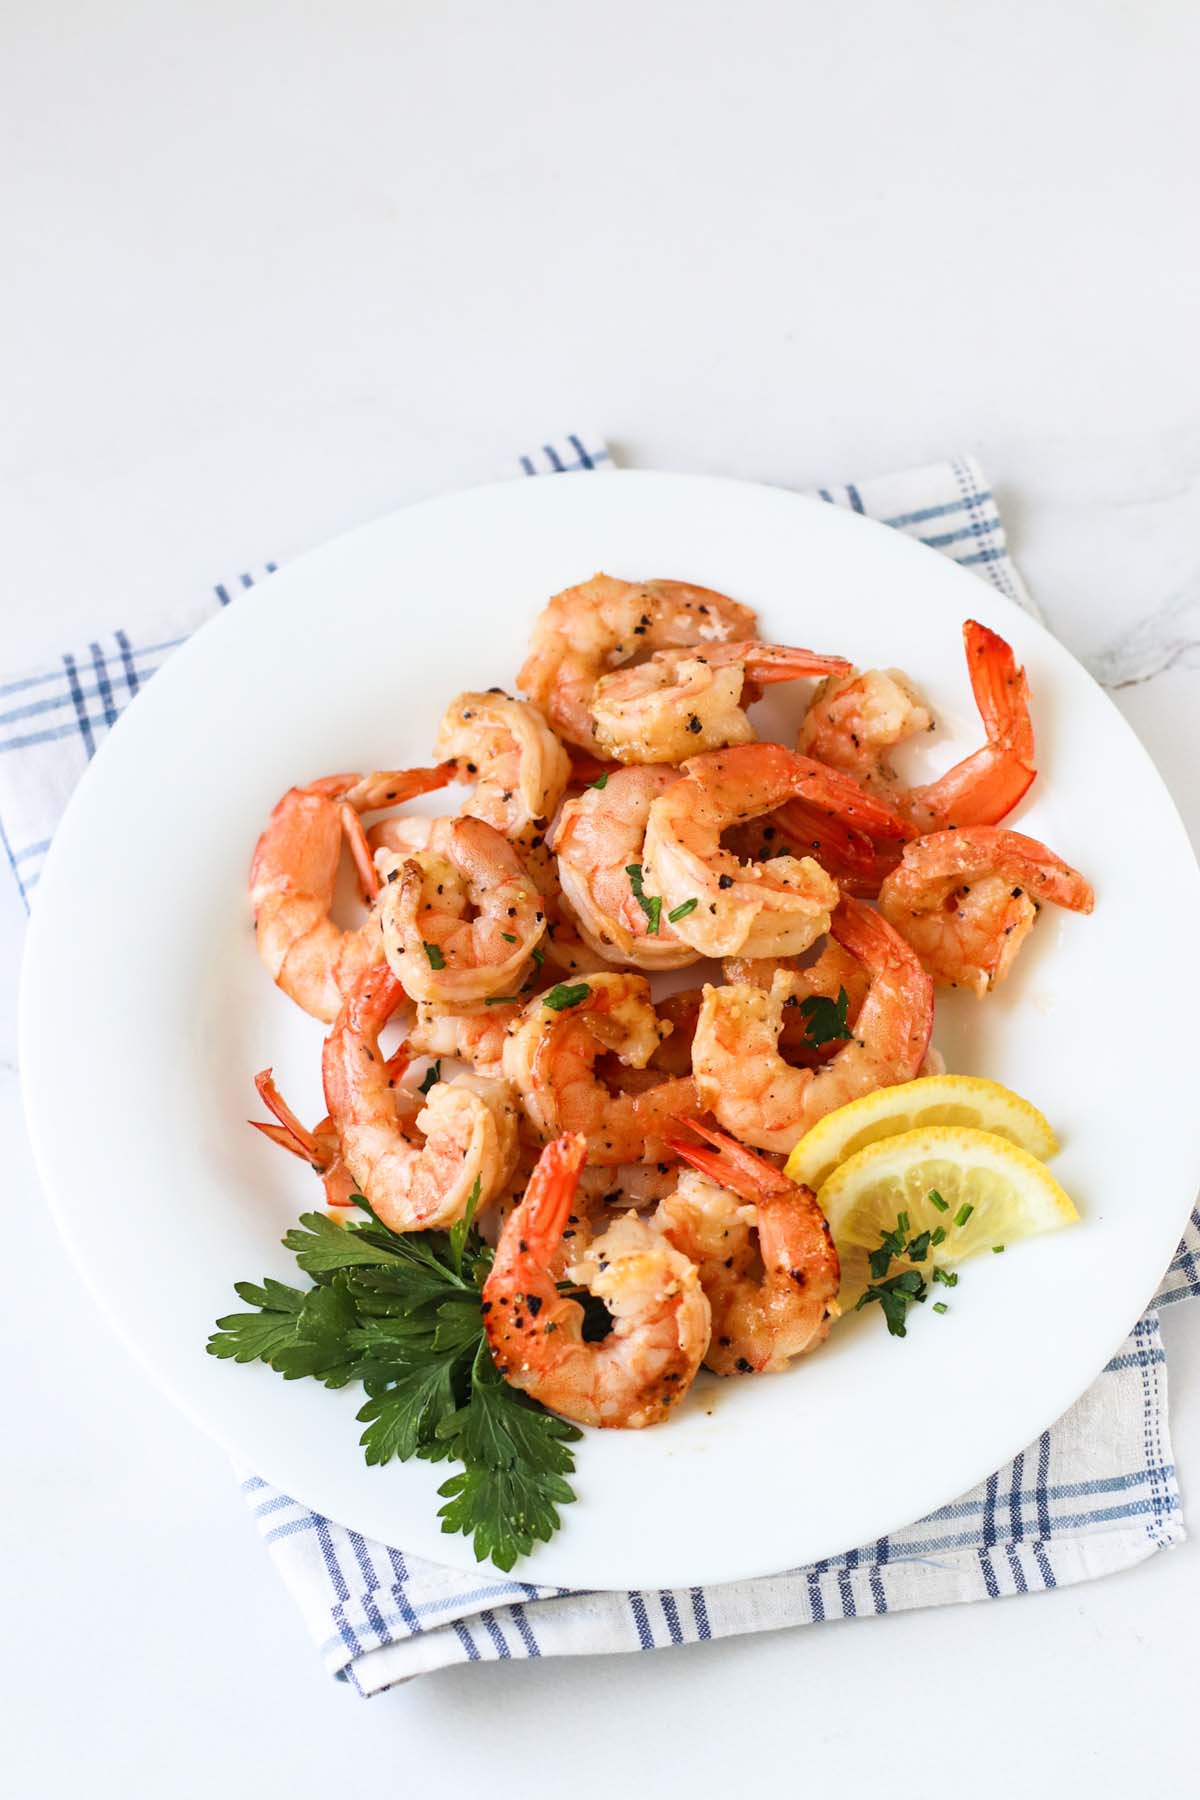 Cooked shrimp on a white plate garnished with parsley and lemon wedges.